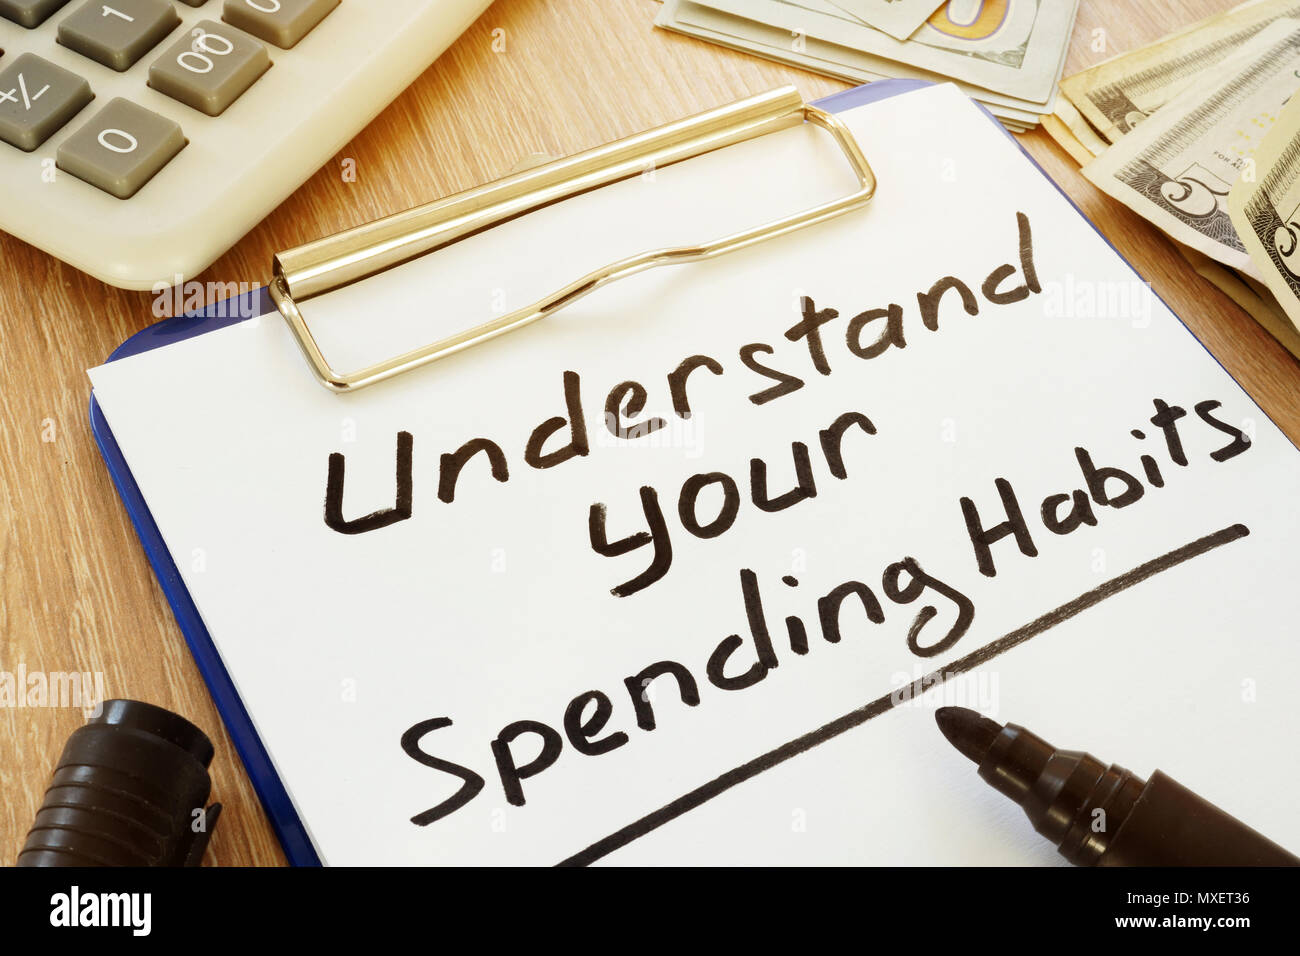 Understand your spending habits written on a clipboard. Stock Photo